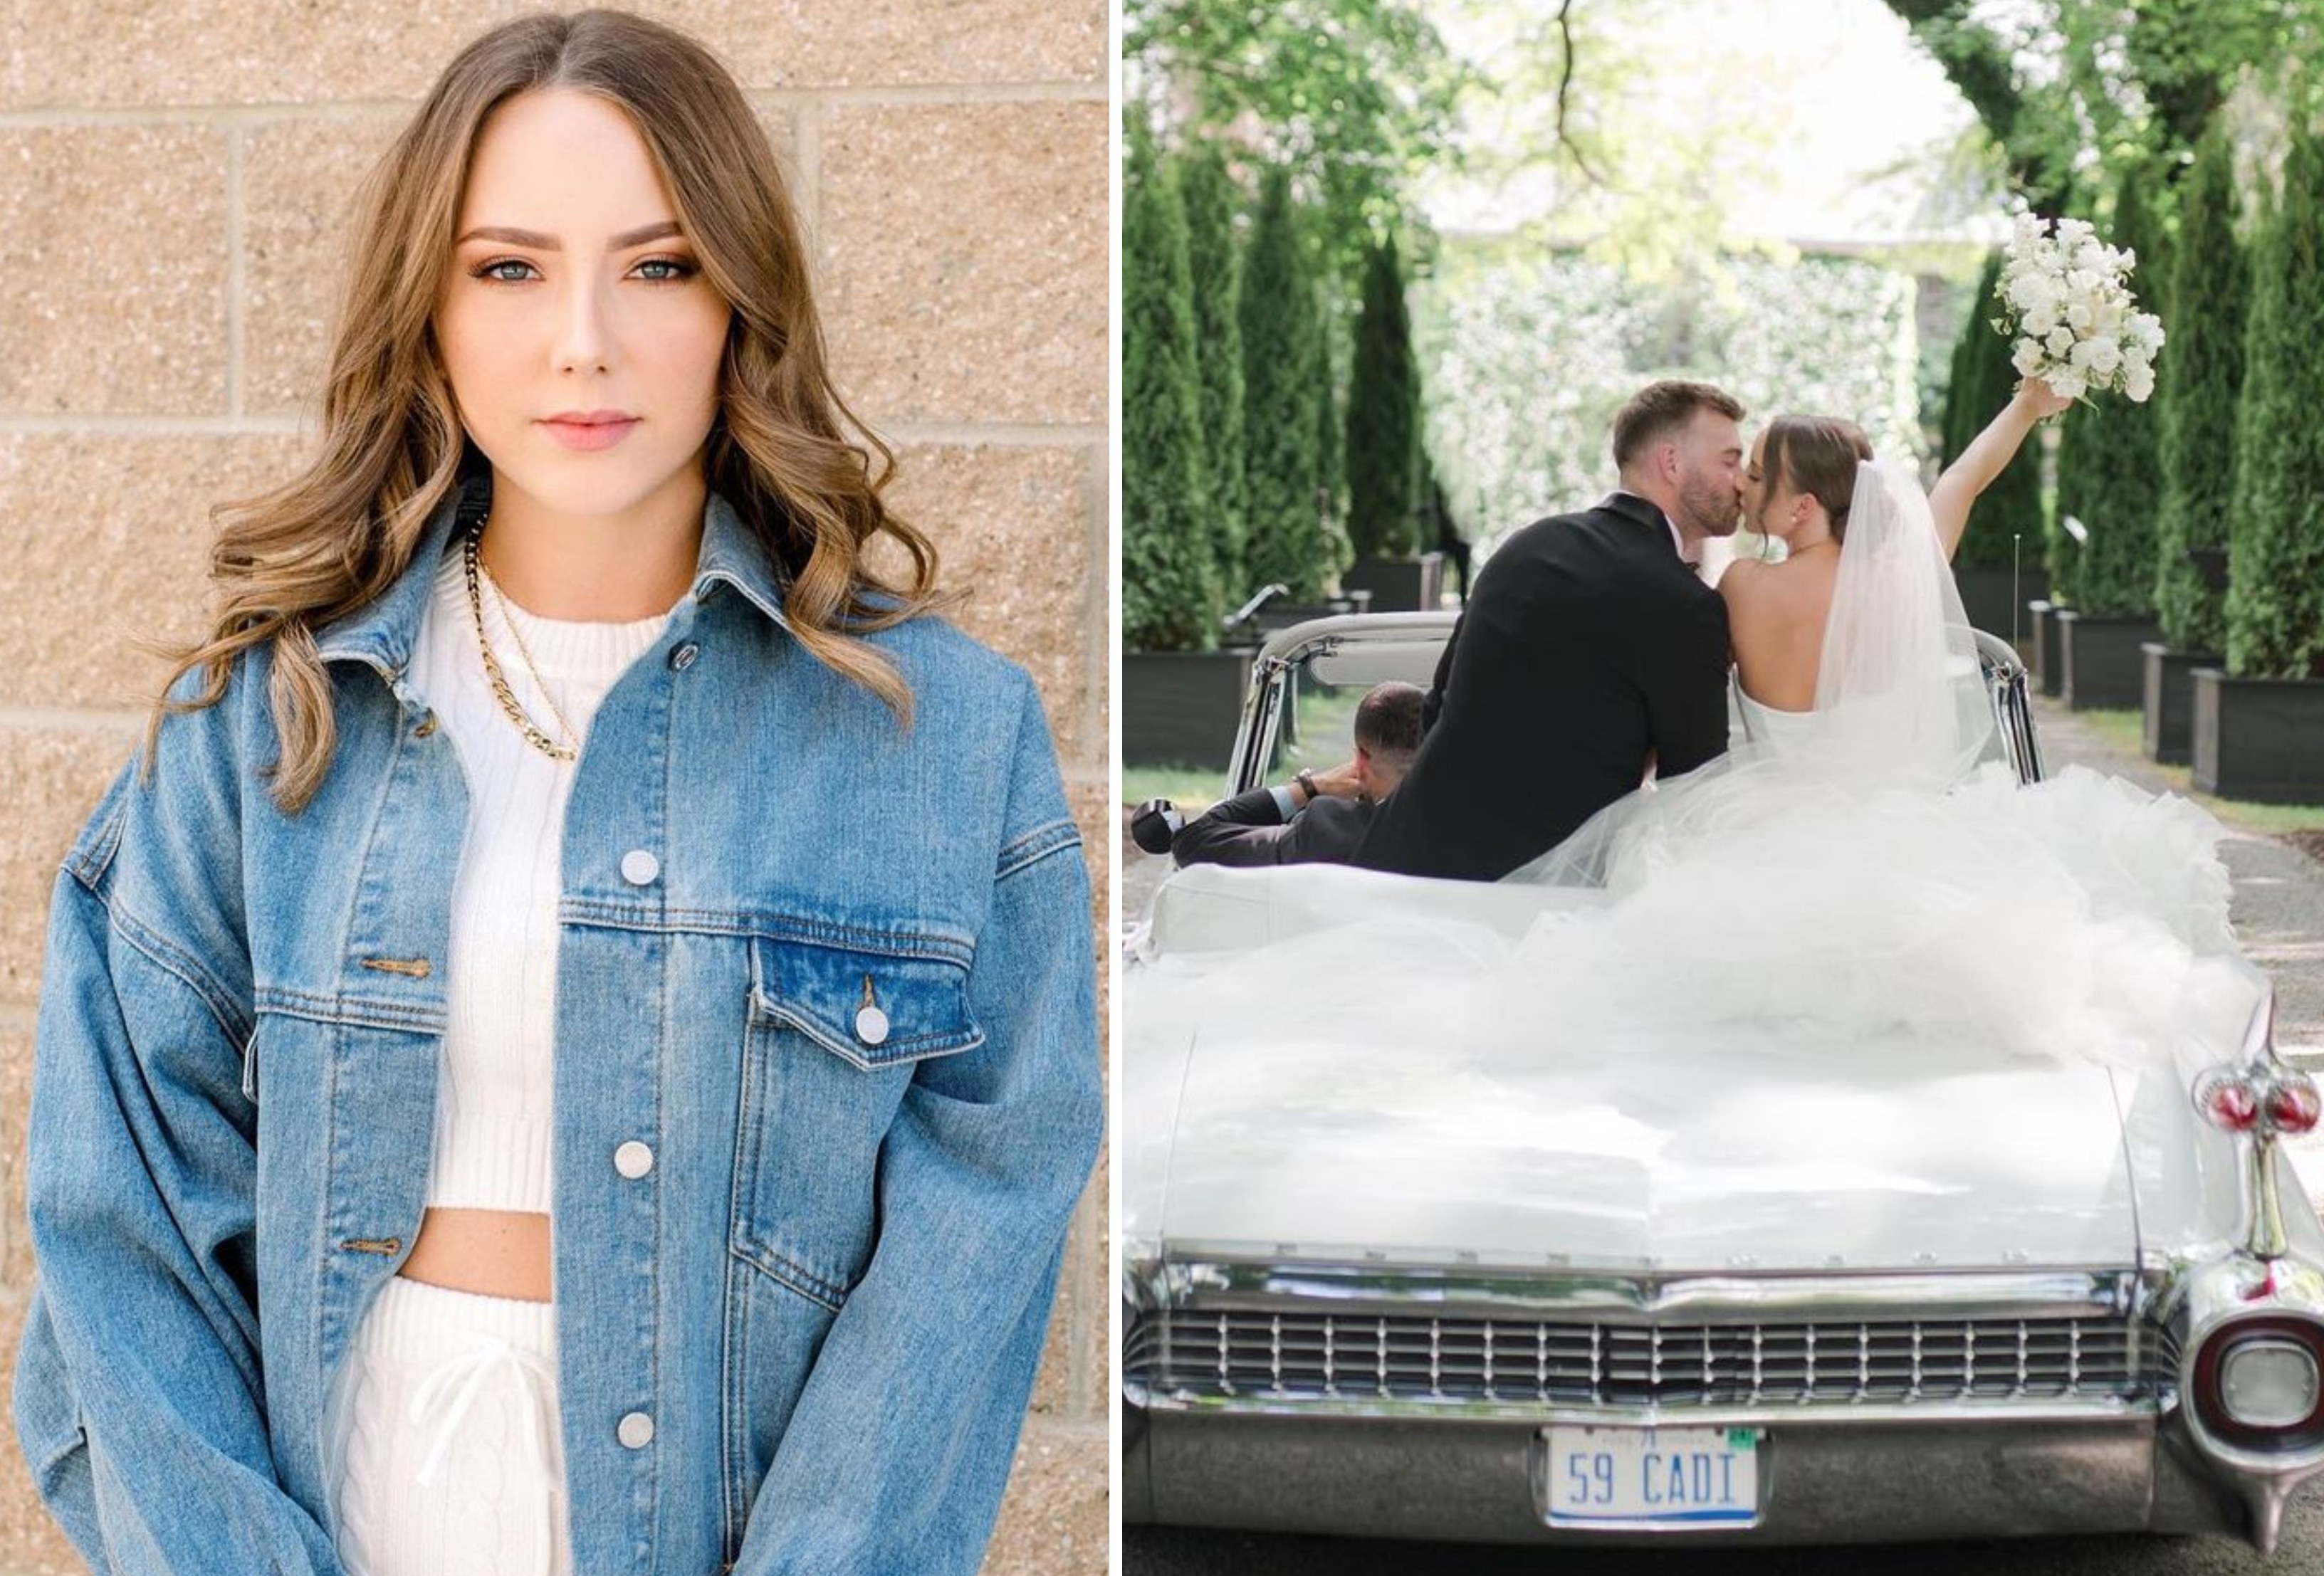 Hailie Jade Mathers has made her dad Eminem proud in more ways than one – and recently wed her long term partner Evan McClintock. Photo: @hailiejade/Instagram